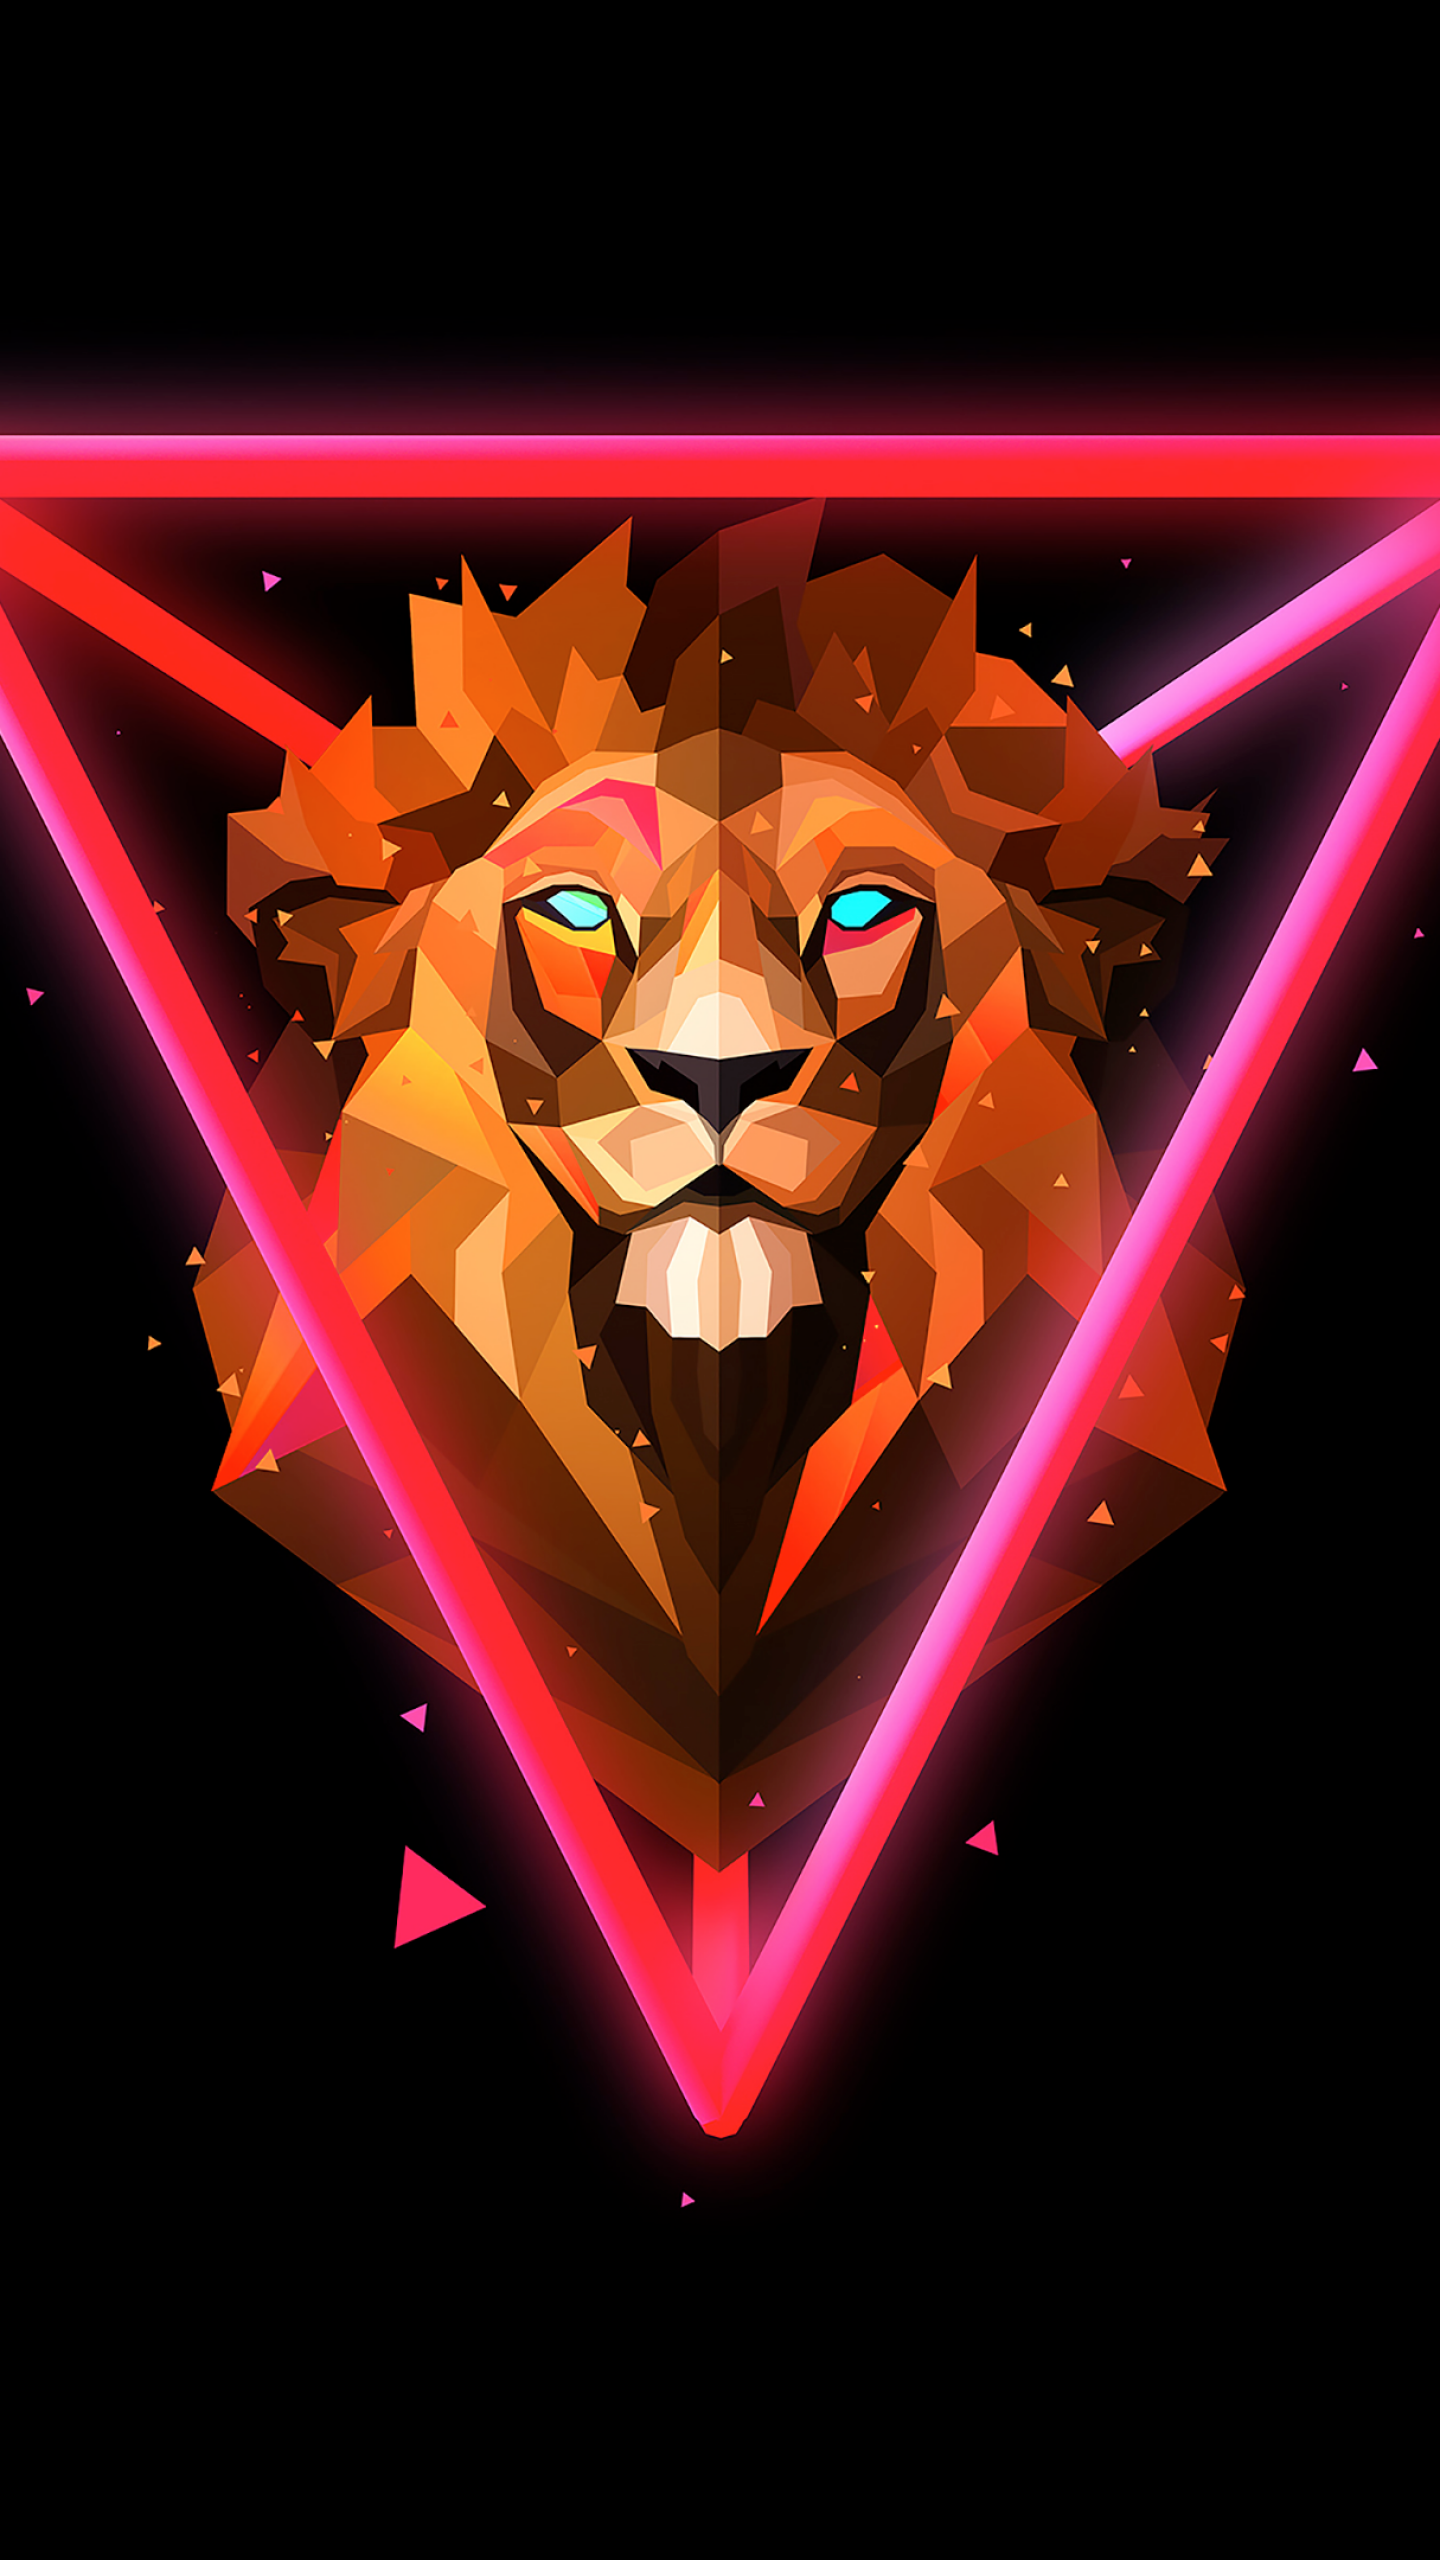 Neon Lion Images | Free Photos, PNG Stickers, Wallpapers & Backgrounds -  rawpixel